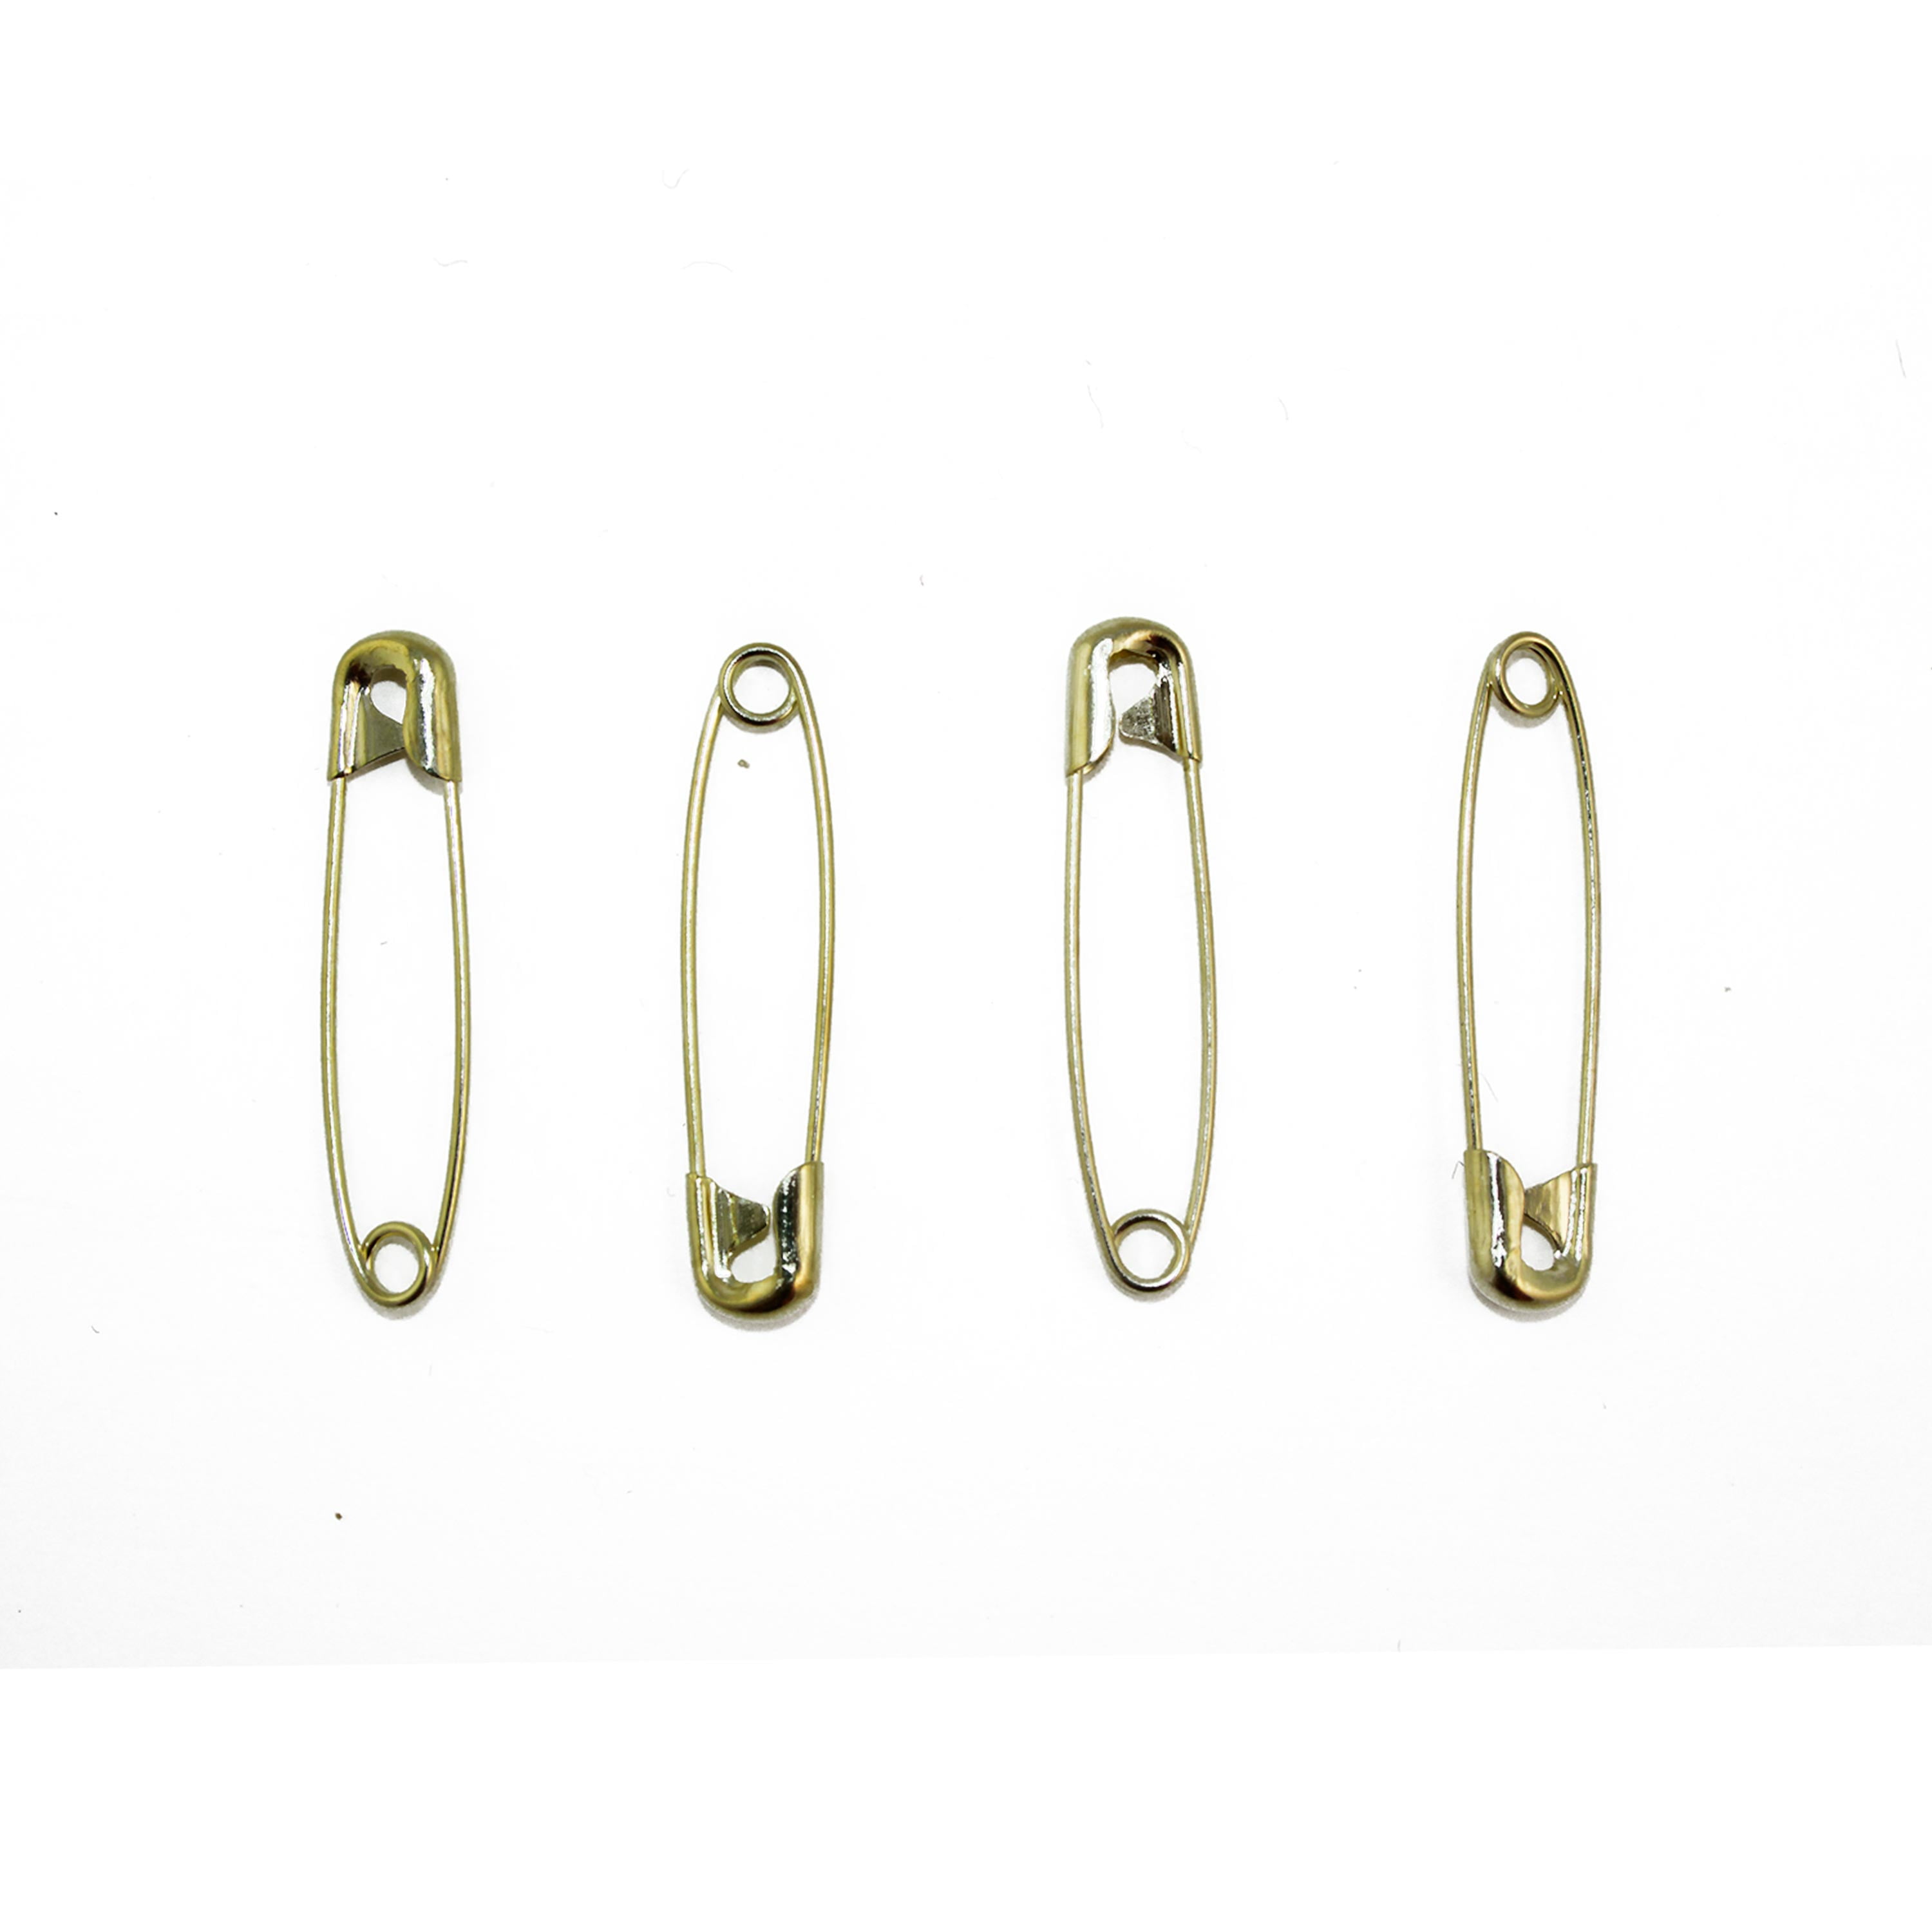 Set of 2 Large Beaded Safety Pins Gold Tone Clear Yellow White